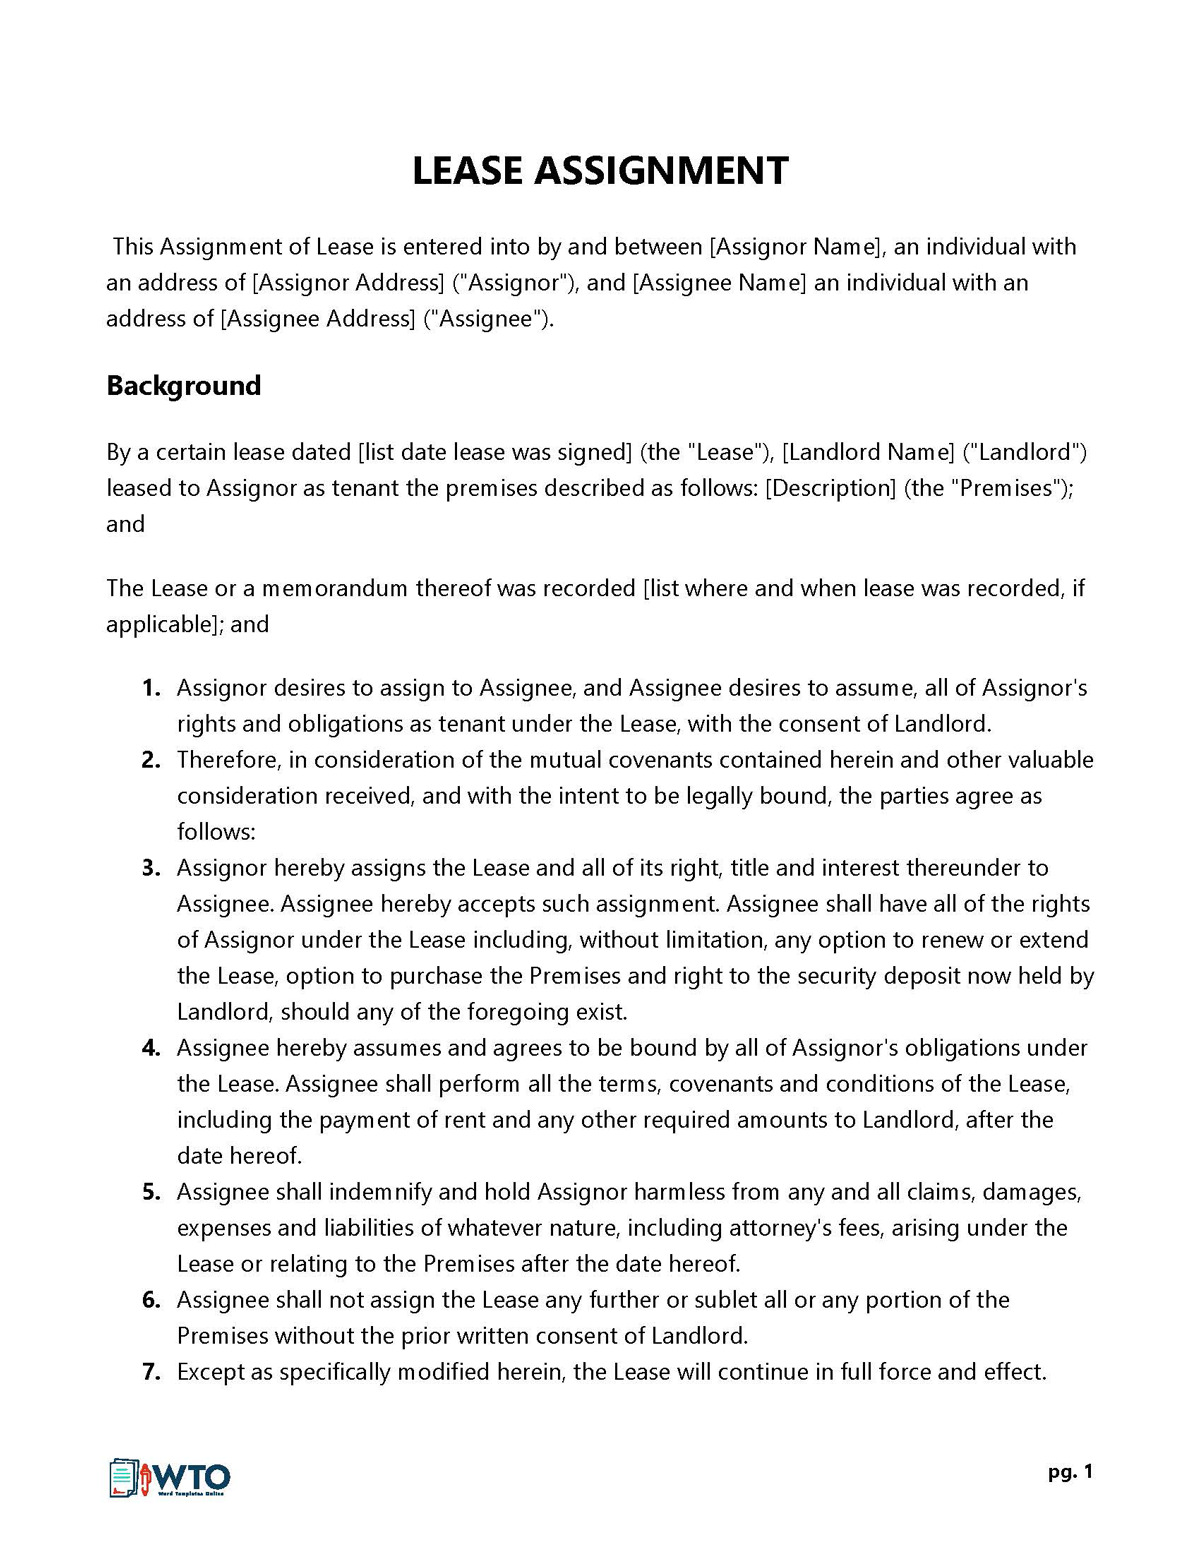 Assignment of Lease Template - Easy-to-Use Word Document